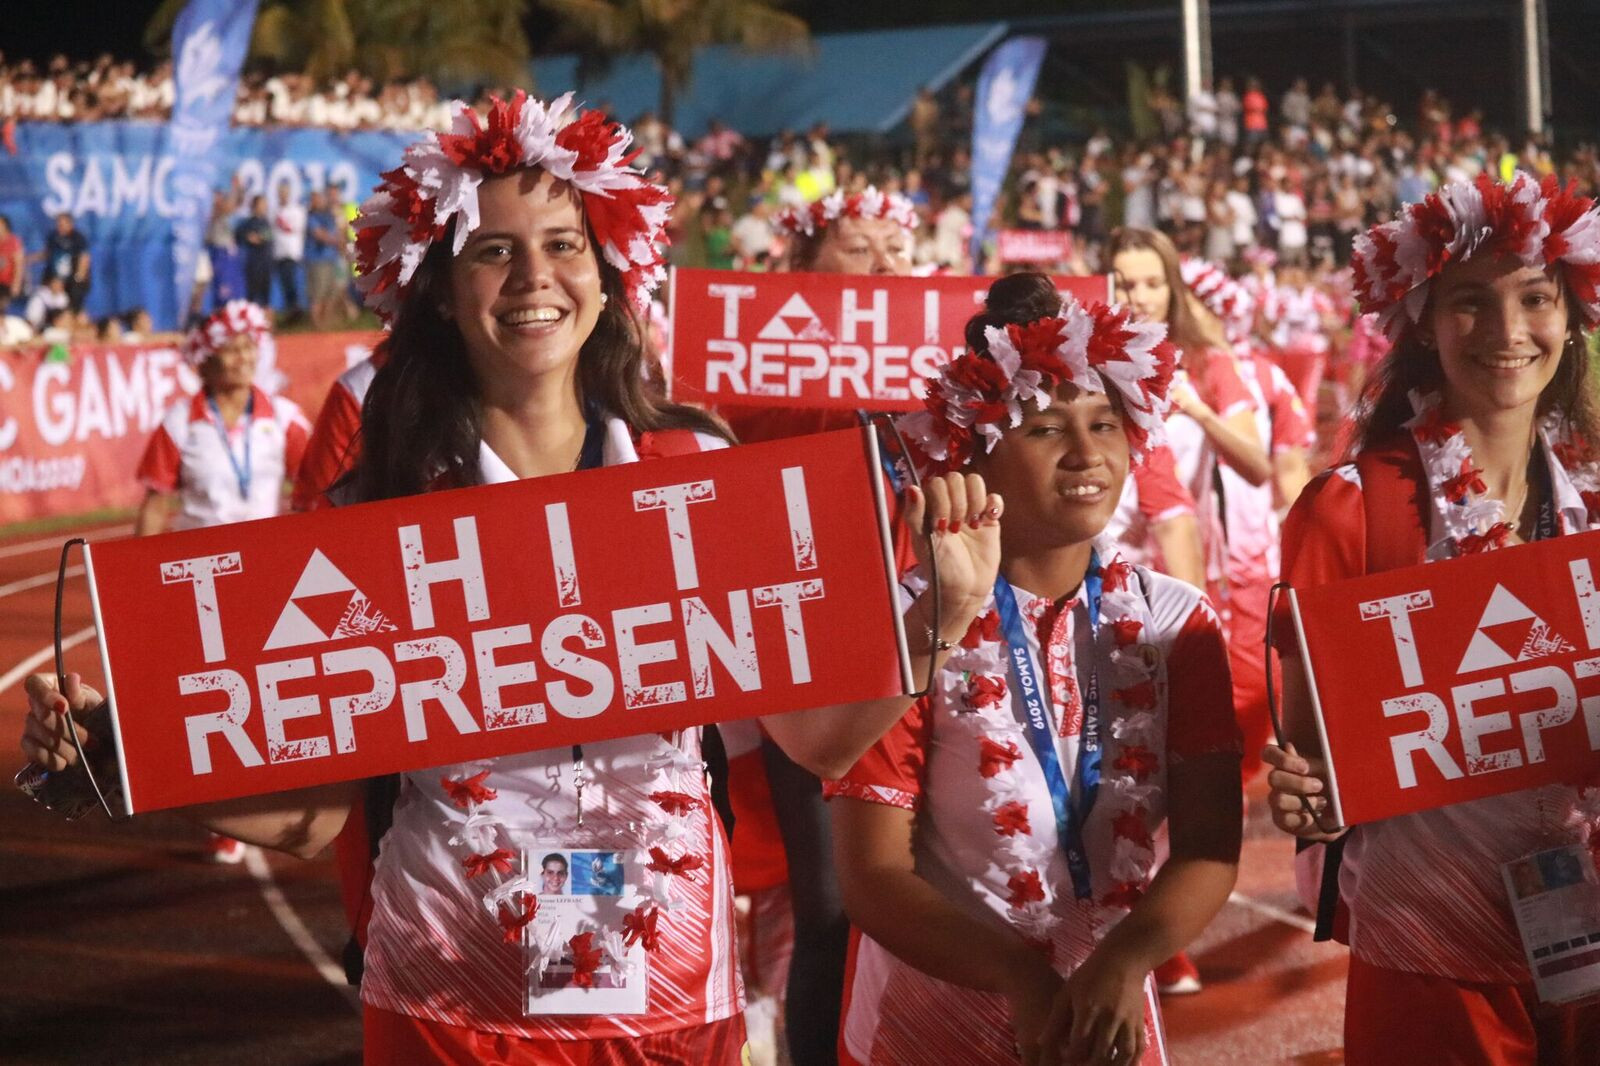 The Tahiti team provided a vibrant touch to the opening parade ©Roland Setu/Games News Service